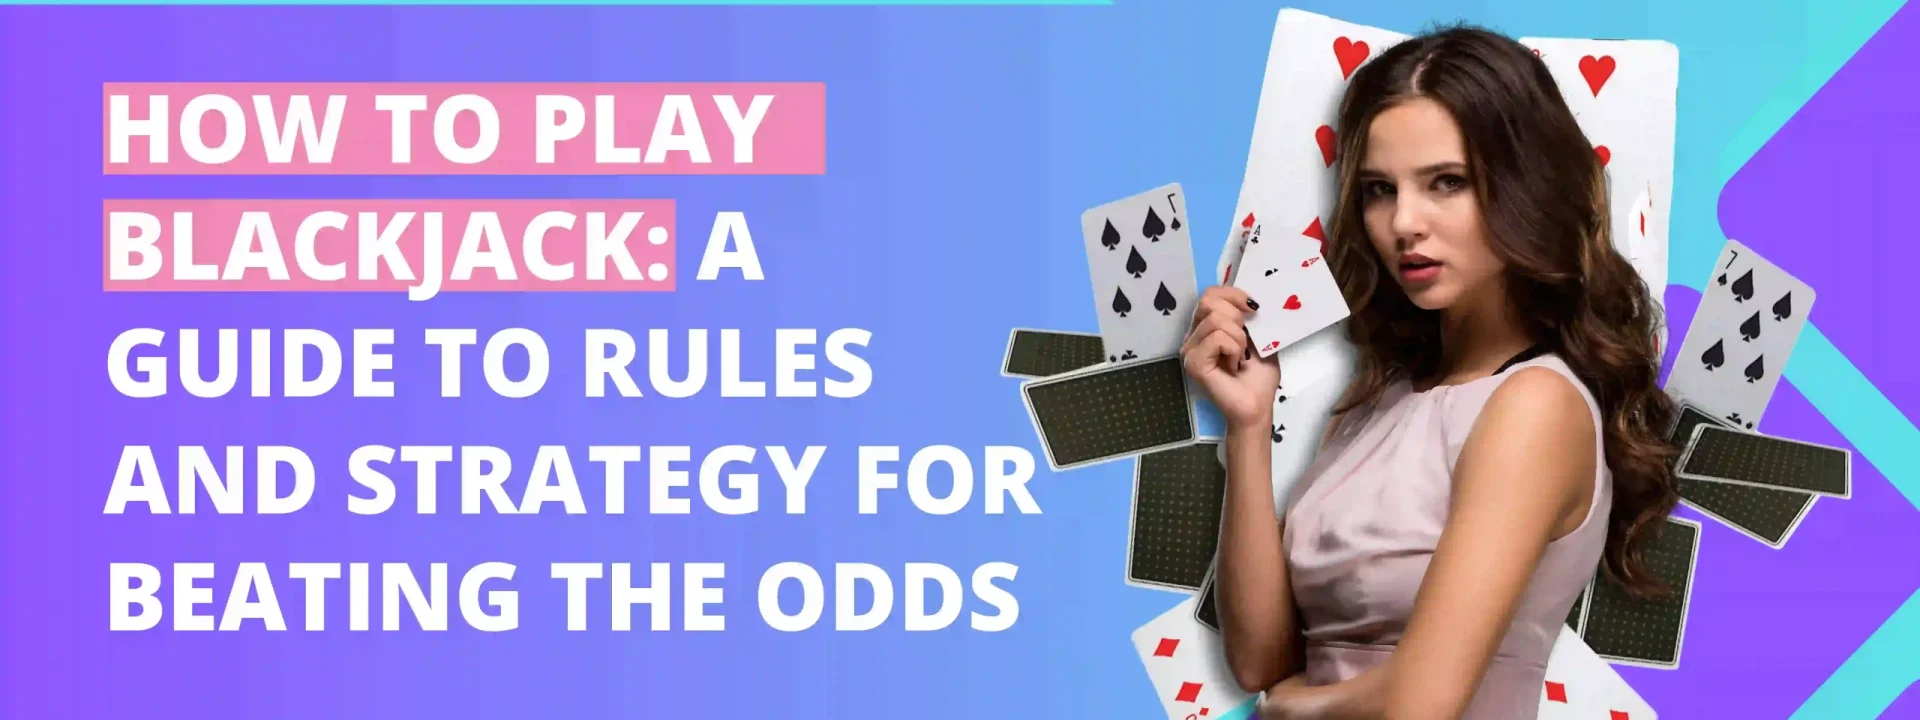 How to Play Blackjack A Guide to Rules and Strategy for Beating the Odds